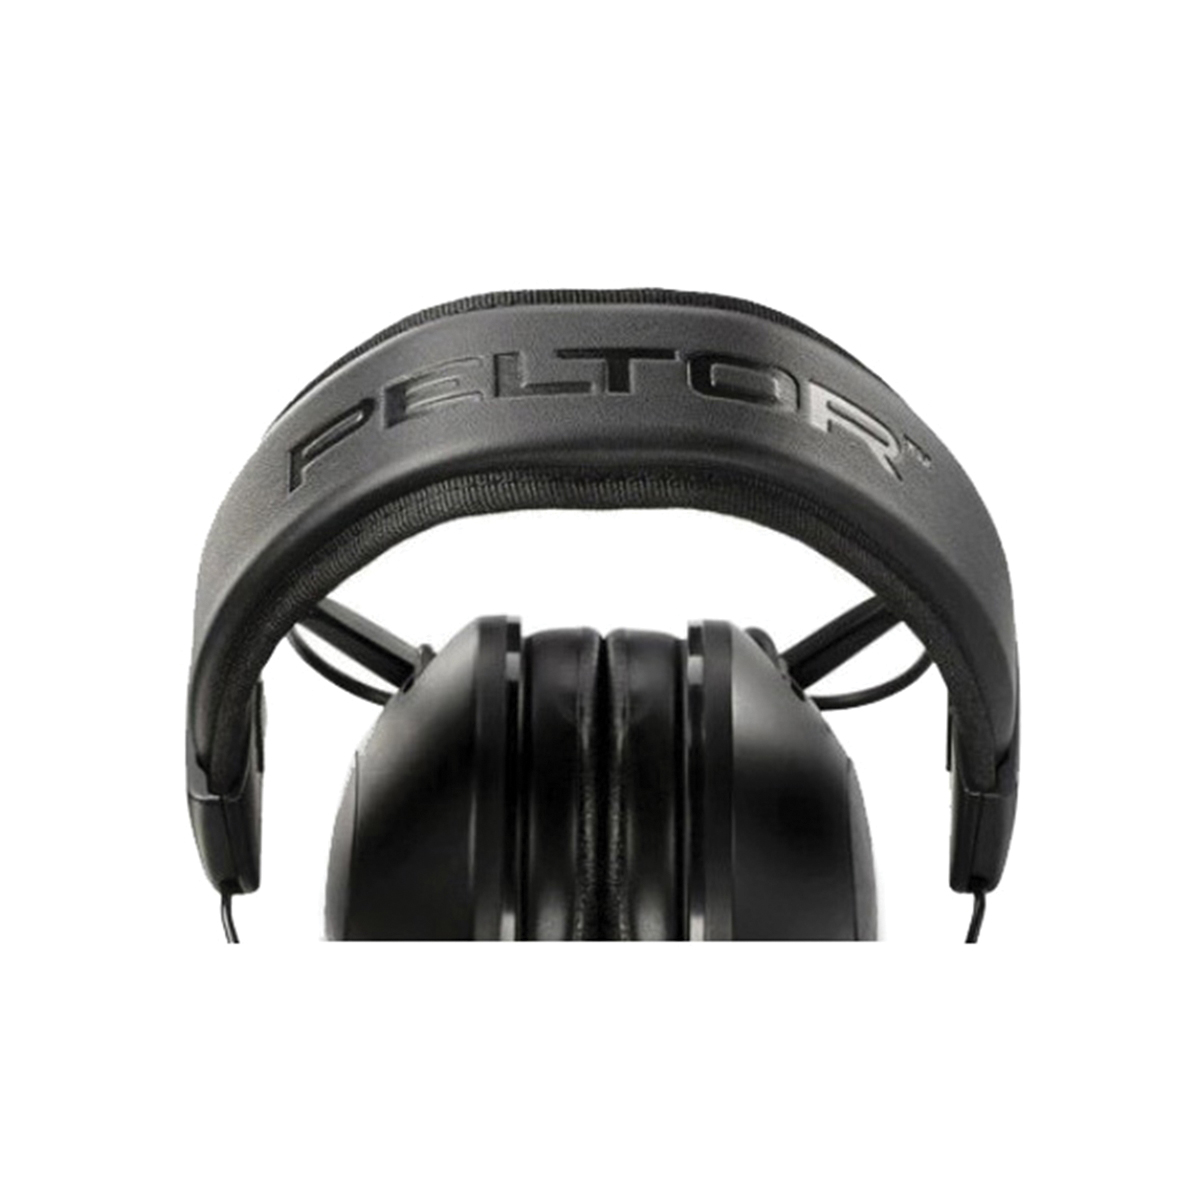 PELTOR Tactical 100 Series TAC100-OTH Electronic Hearing Protector Ear Muffs, 22 dB NRR, Black - 5